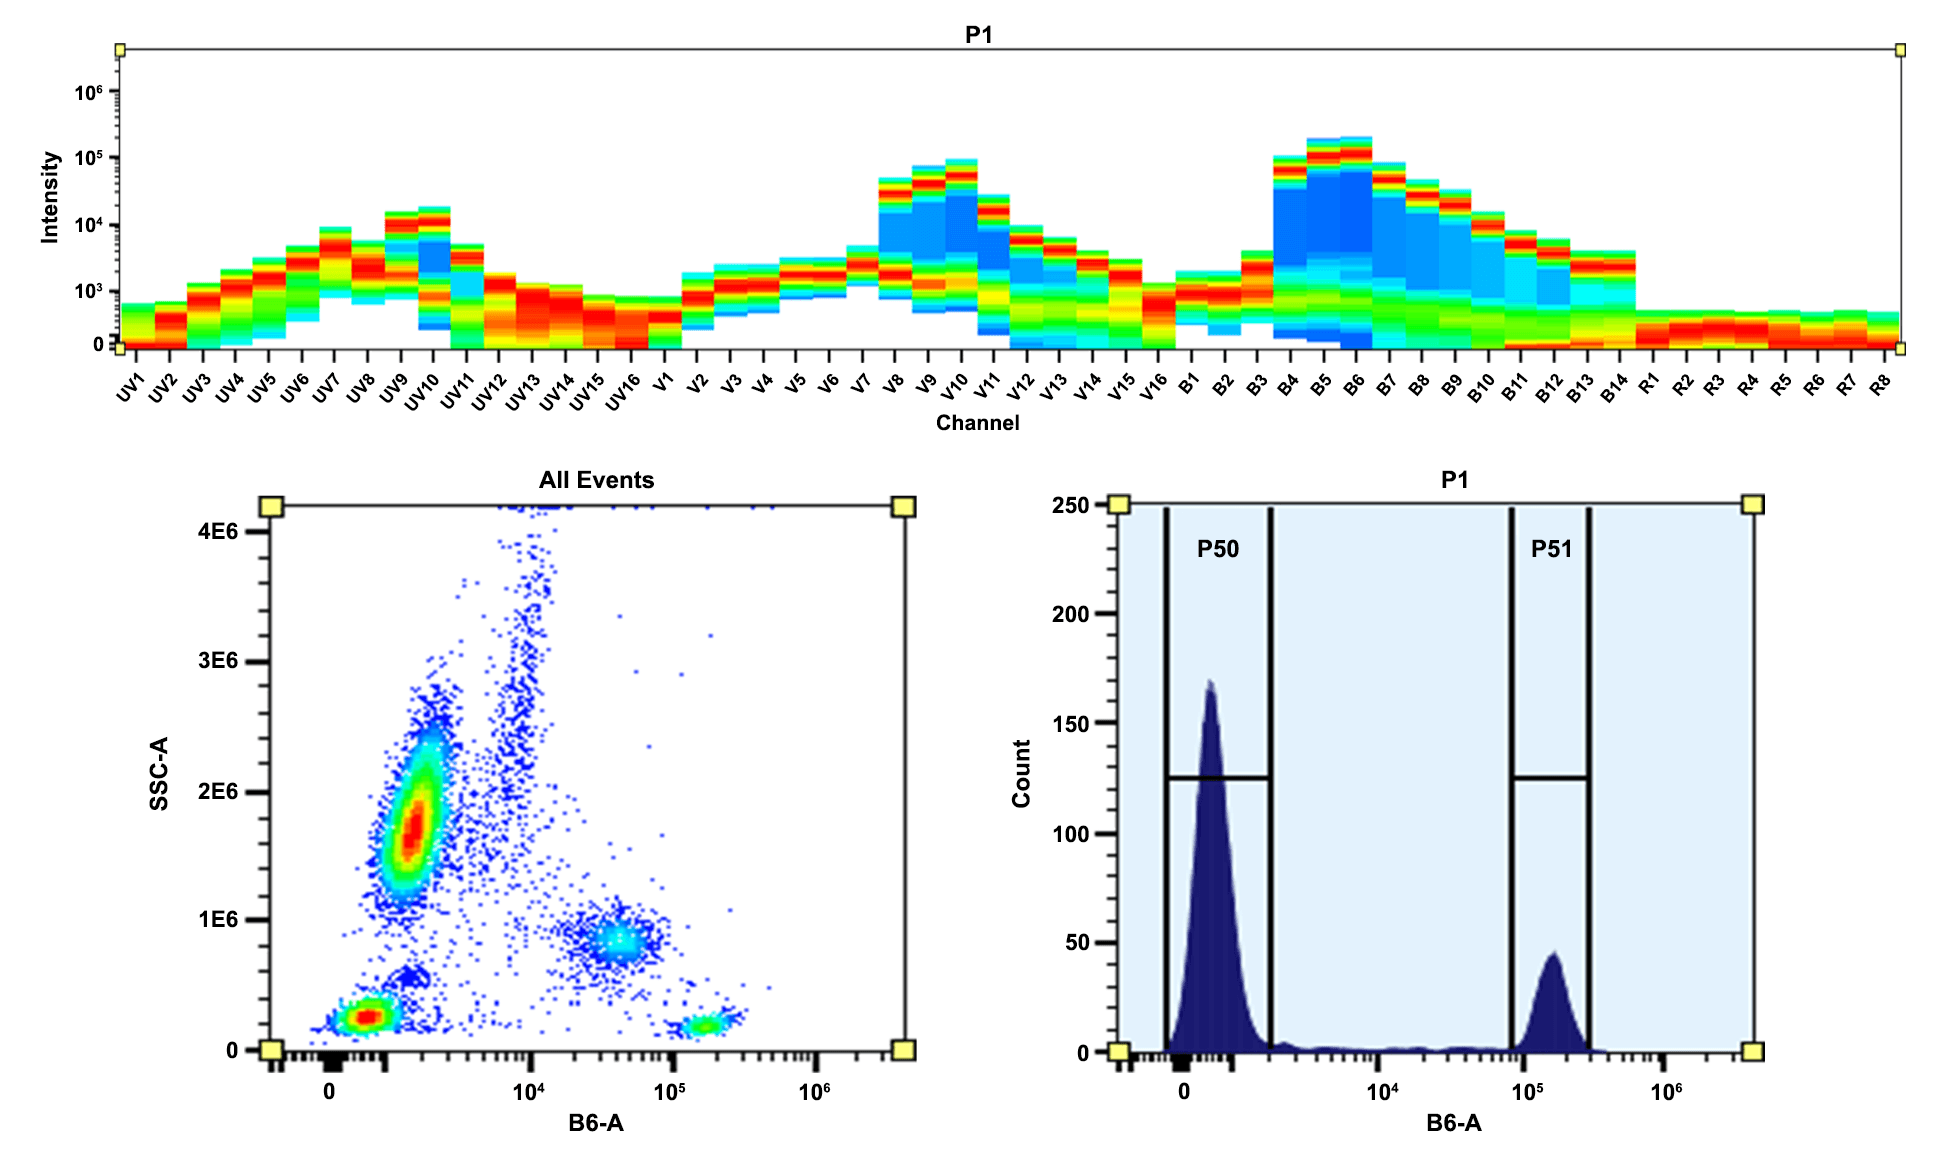 Top) Spectral pattern was generated using a 4-laser spectral cytometer. Spatially offset lasers (355 nm, 405 nm, 488 nm, and 640 nm) were used to create four distinct emission profiles, then, when combined, yielded the overall spectral signature. Bottom) Flow cytometry analysis of whole blood stained with PE/iFlour® 594 anti-human CD4 *SK3* conjugate. The fluorescence signal was monitored using an Aurora spectral flow cytometer in the PE/iFluor® 594 specific B6-A channel.